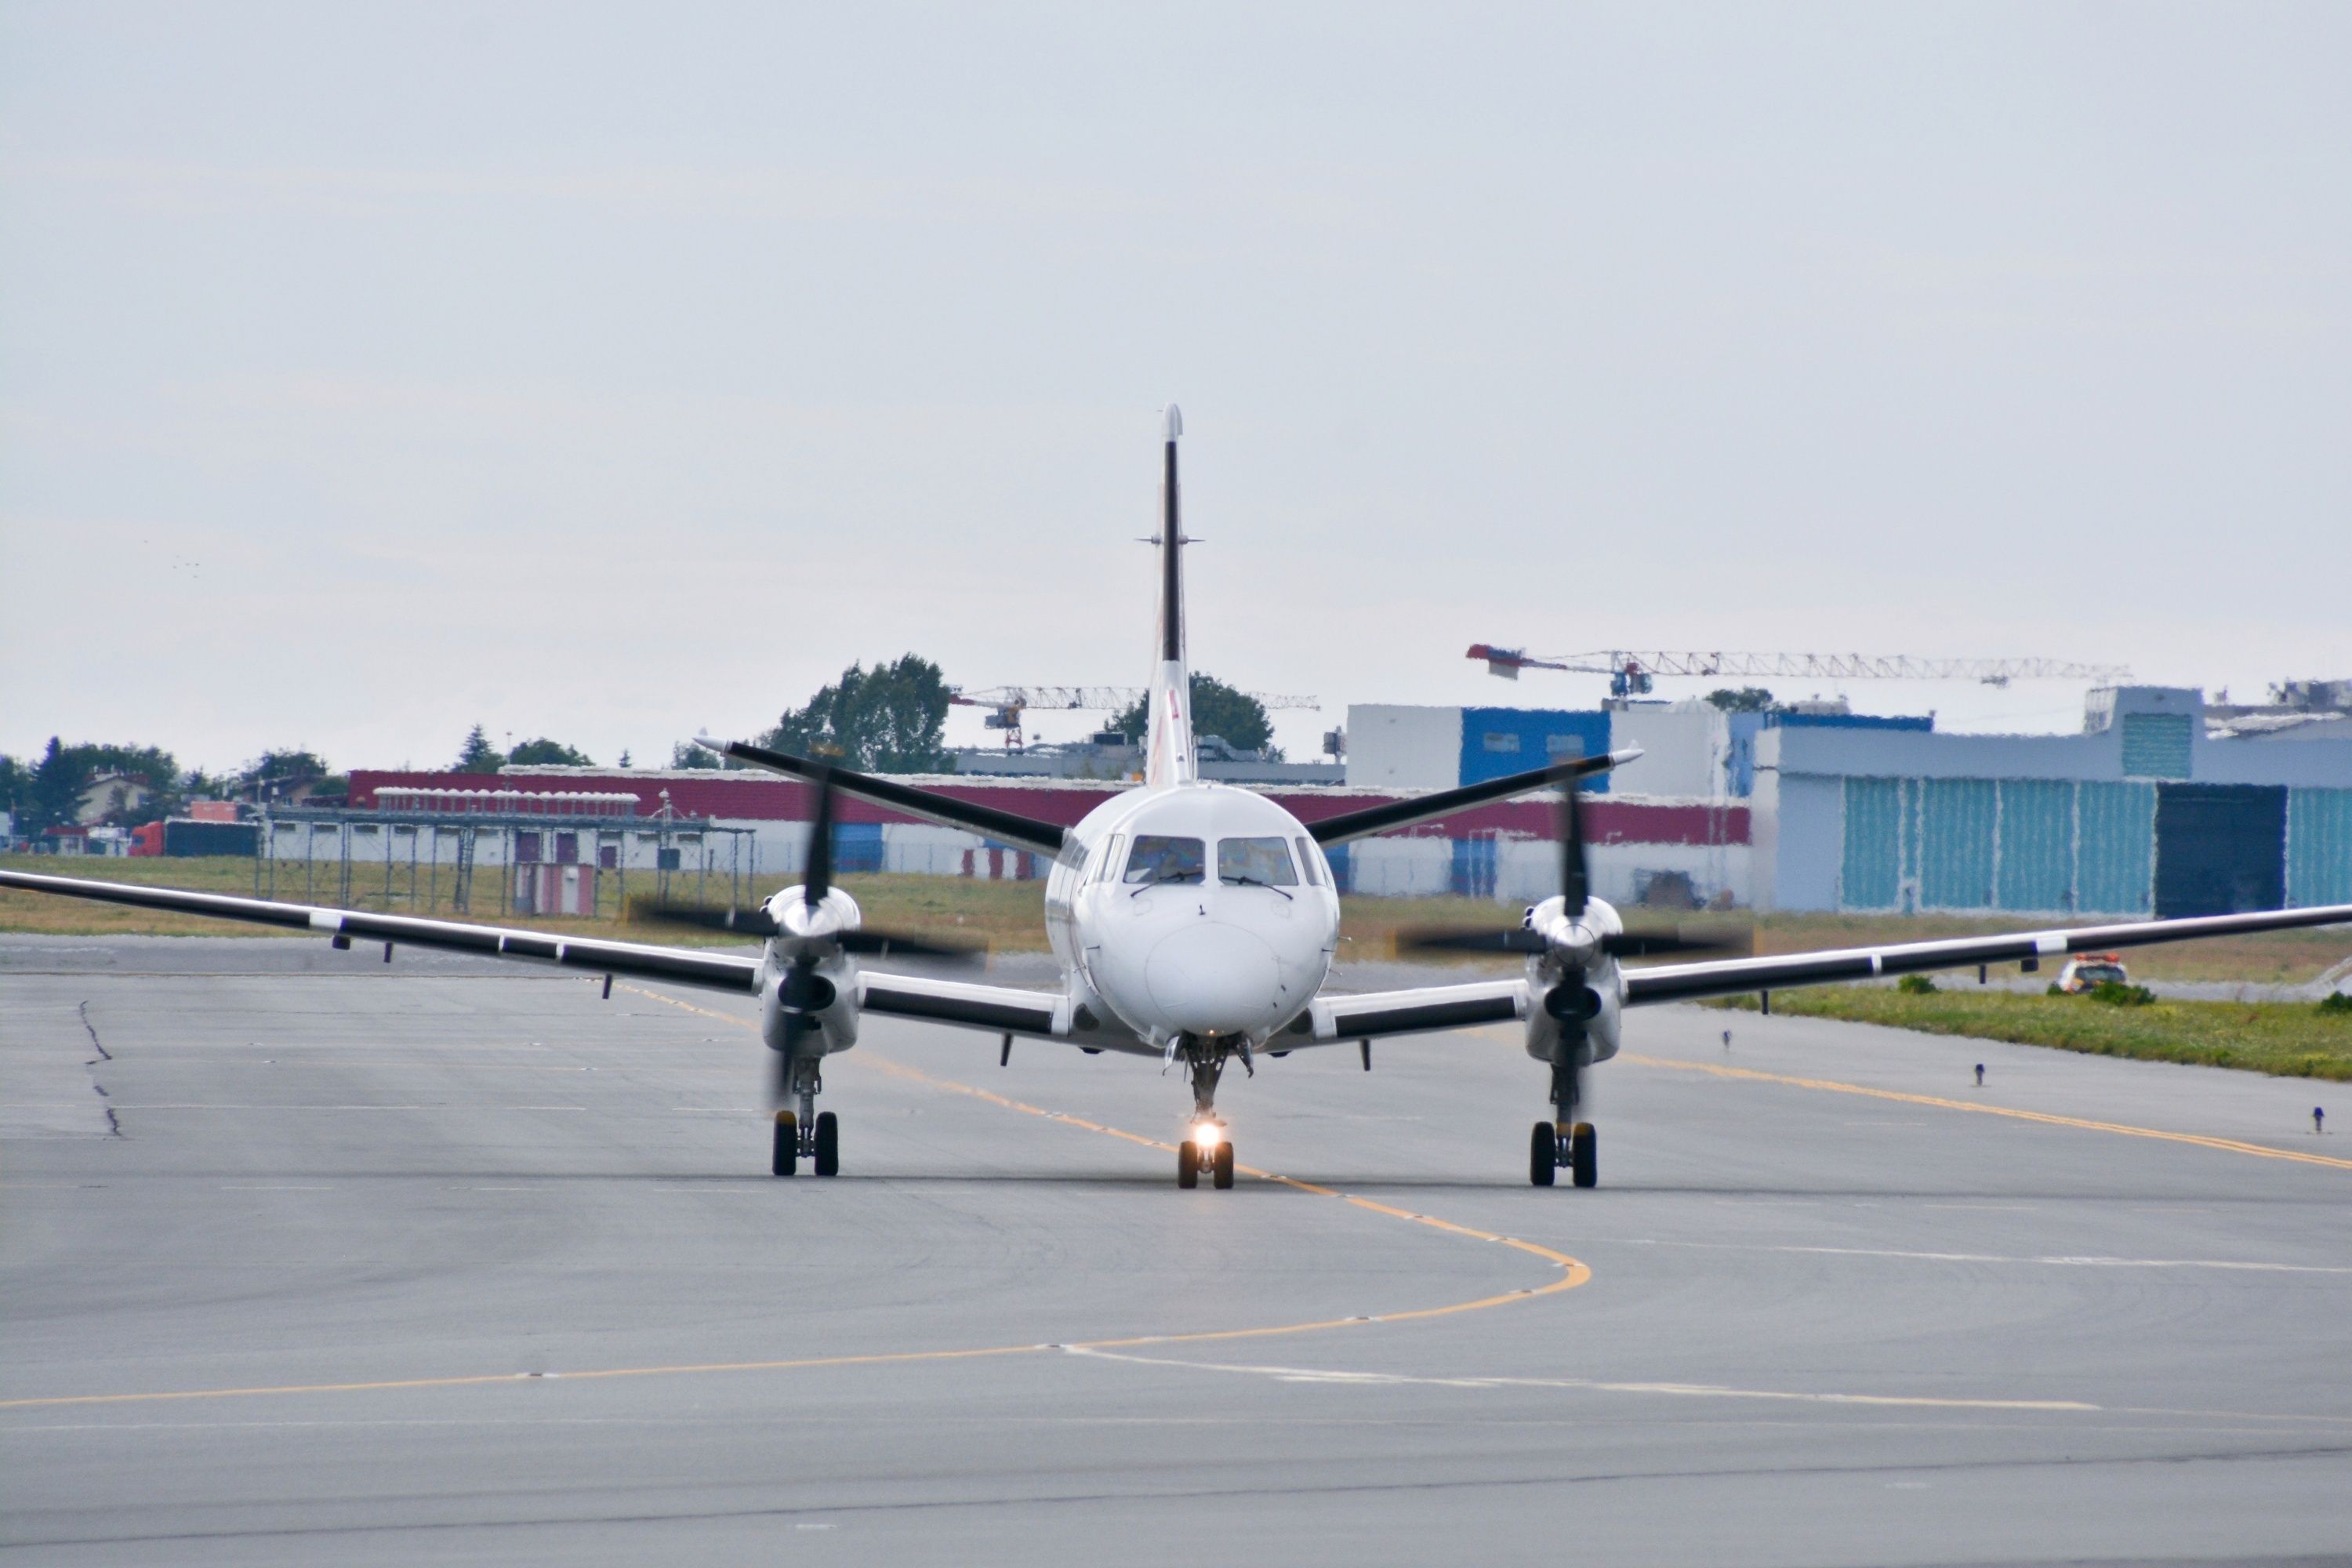 A Saab 340 on an airport apron.